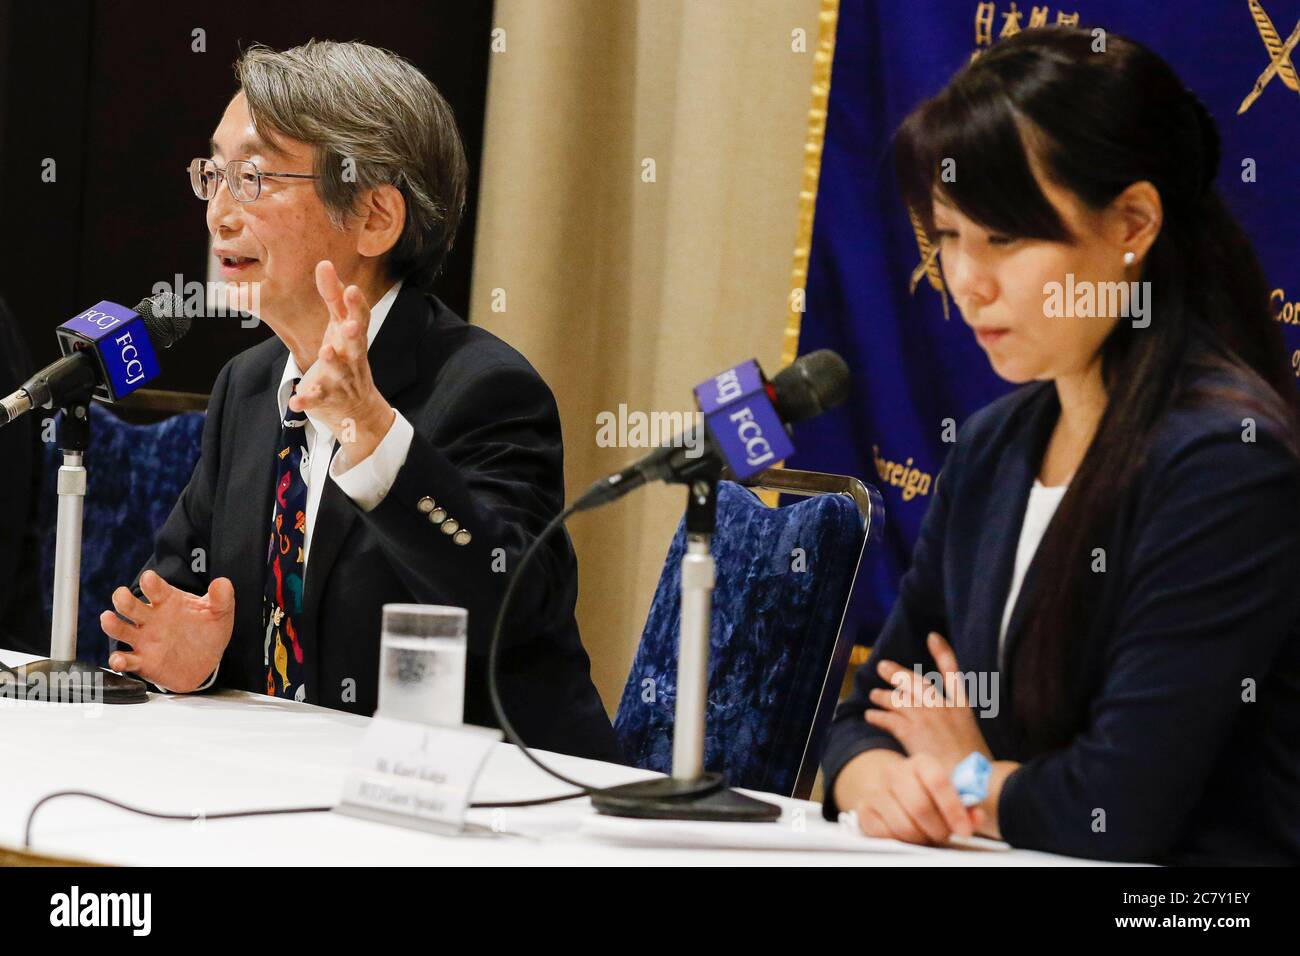 (L to R) Dr. Shinya Iwamuro urologist and public health advocate and Kaori Kohga head of the Nightlife Business Association, speak during a news conference at The Foreign Correspondents' Club of Japan (FCCJ) on July 20, 2020, Tokyo, Japan. Kohga, who is representing hostess workers and clubs across Japan, came to the Club alongside Dr. Iwamuro to talk about the challenges of nightlife workers amid coronavirus pandemic, in which recent infection cases have been rises among people in their 20s and 30s. Credit: Rodrigo Reyes Marin/AFLO/Alamy Live News Stock Photo